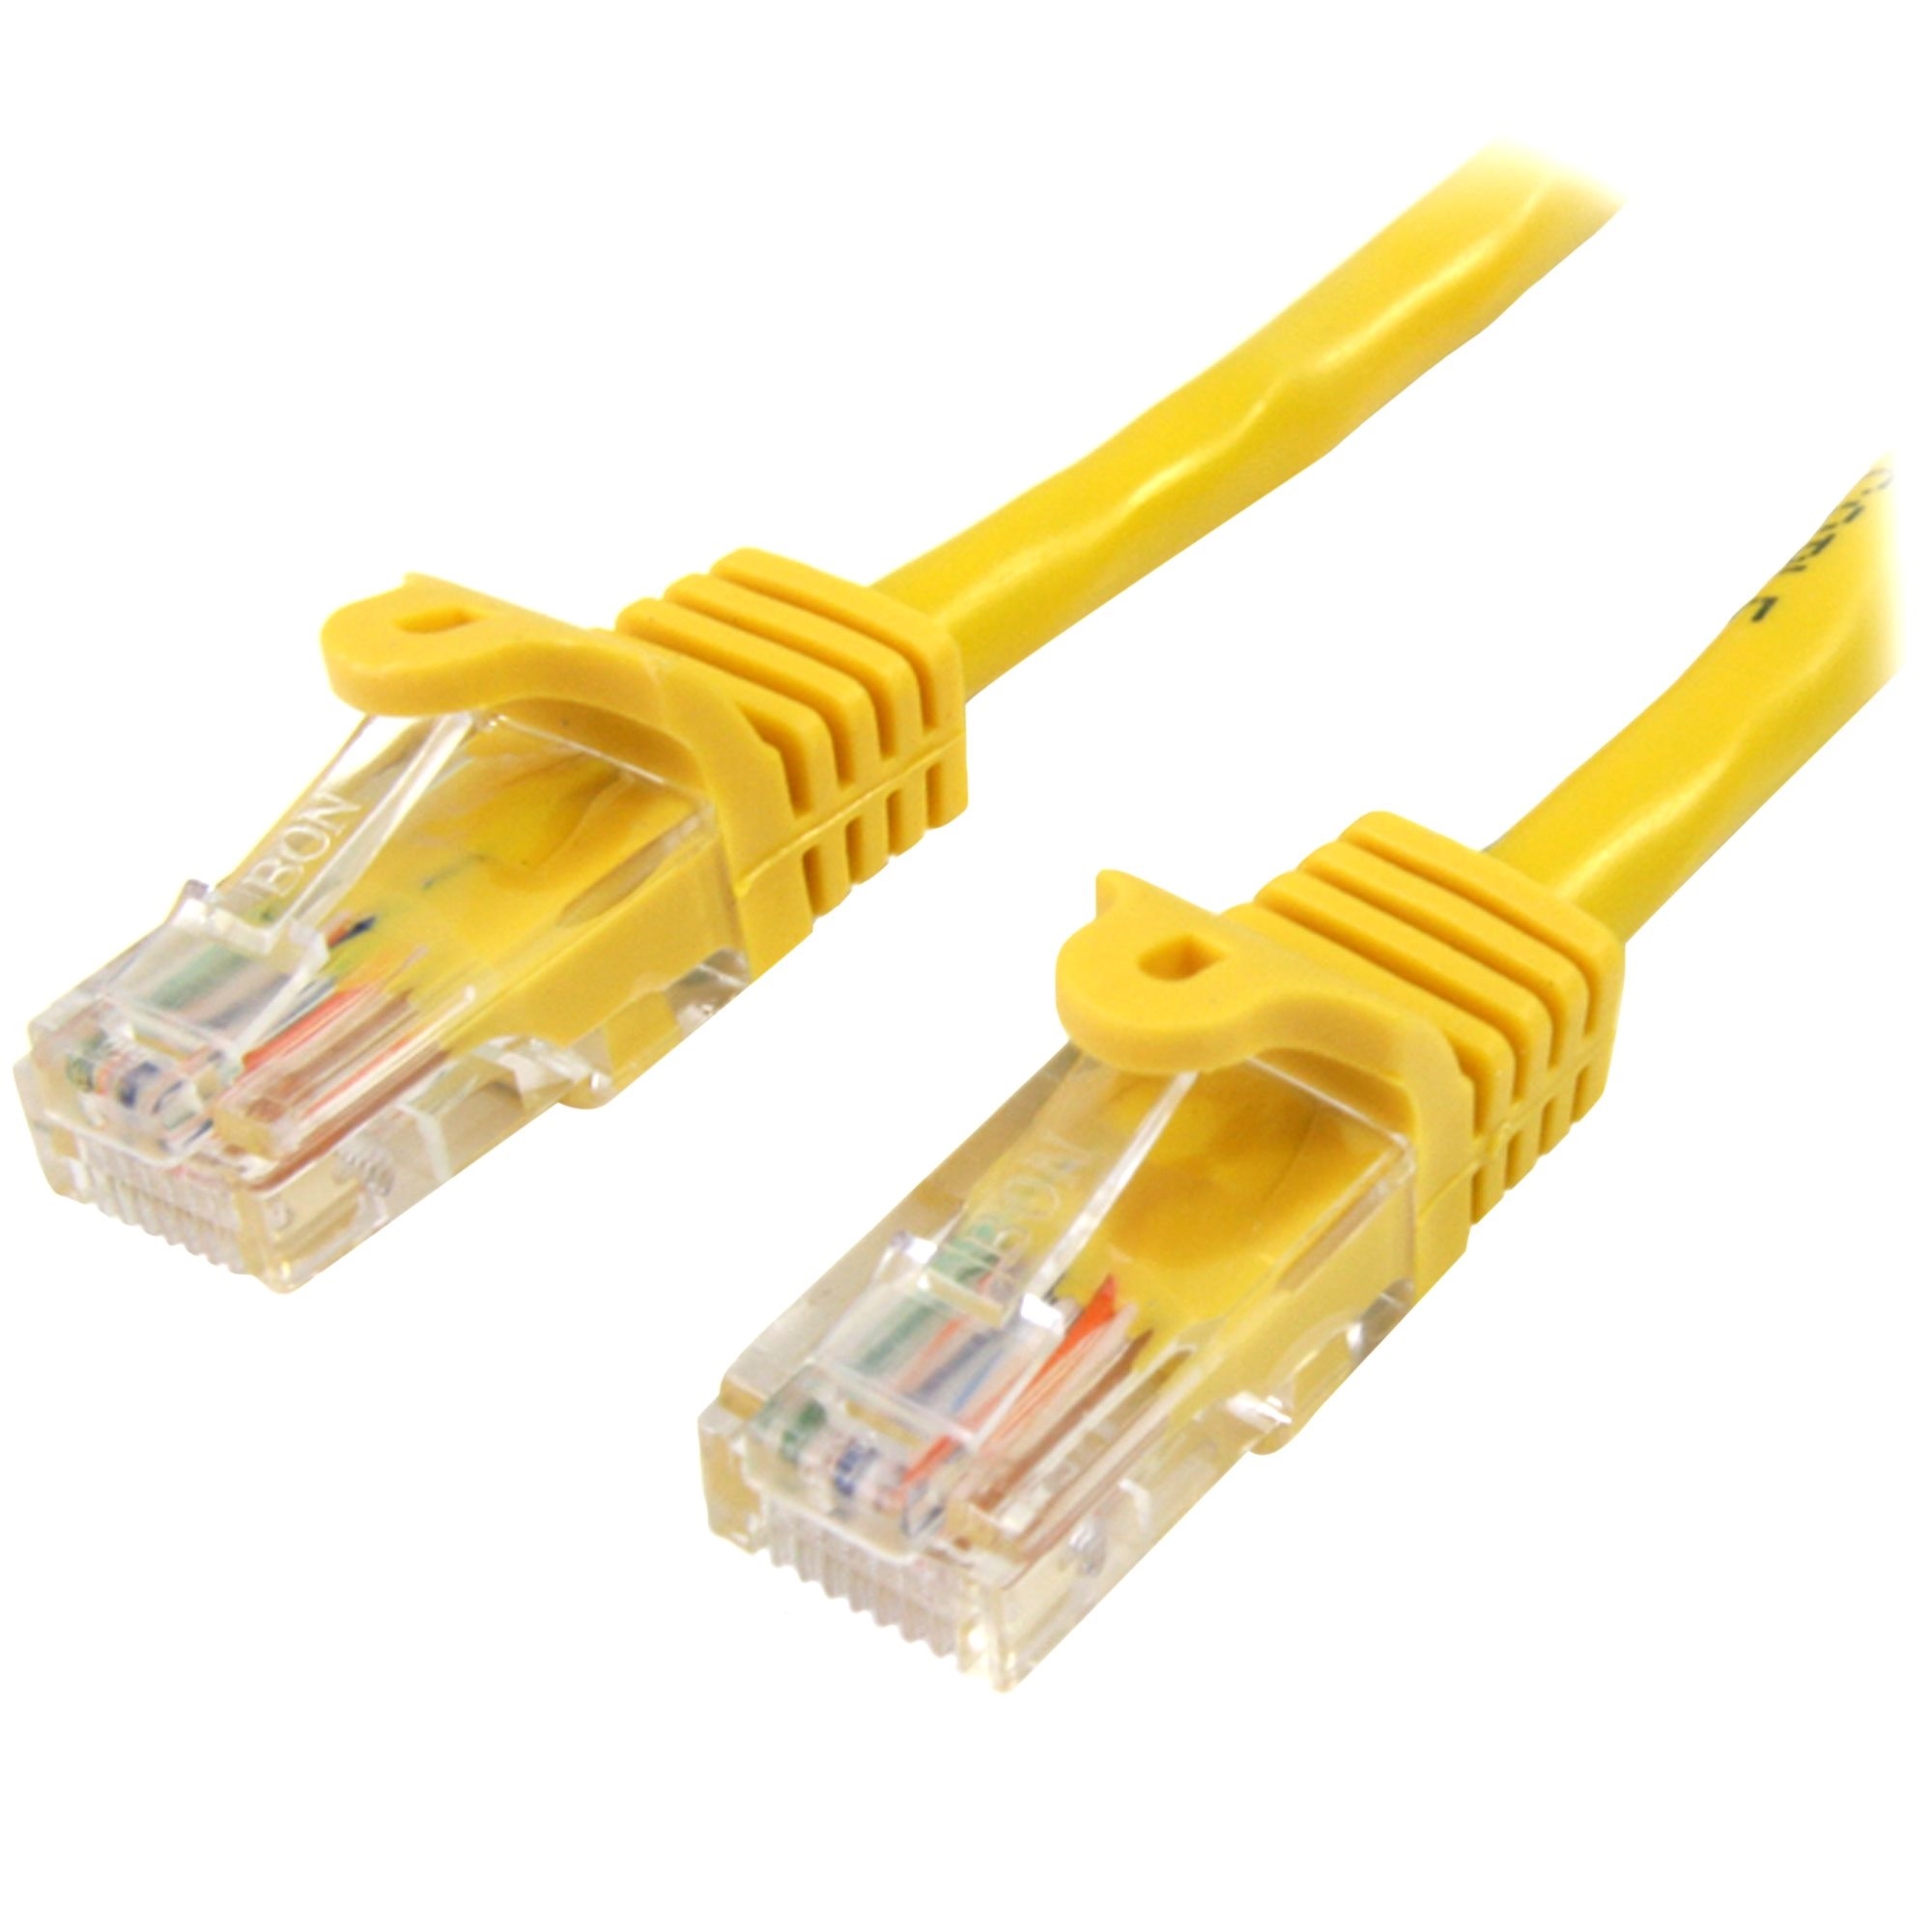 StarTech Snagless UTP Cat5e Patch Cable (Yellow, 2m)